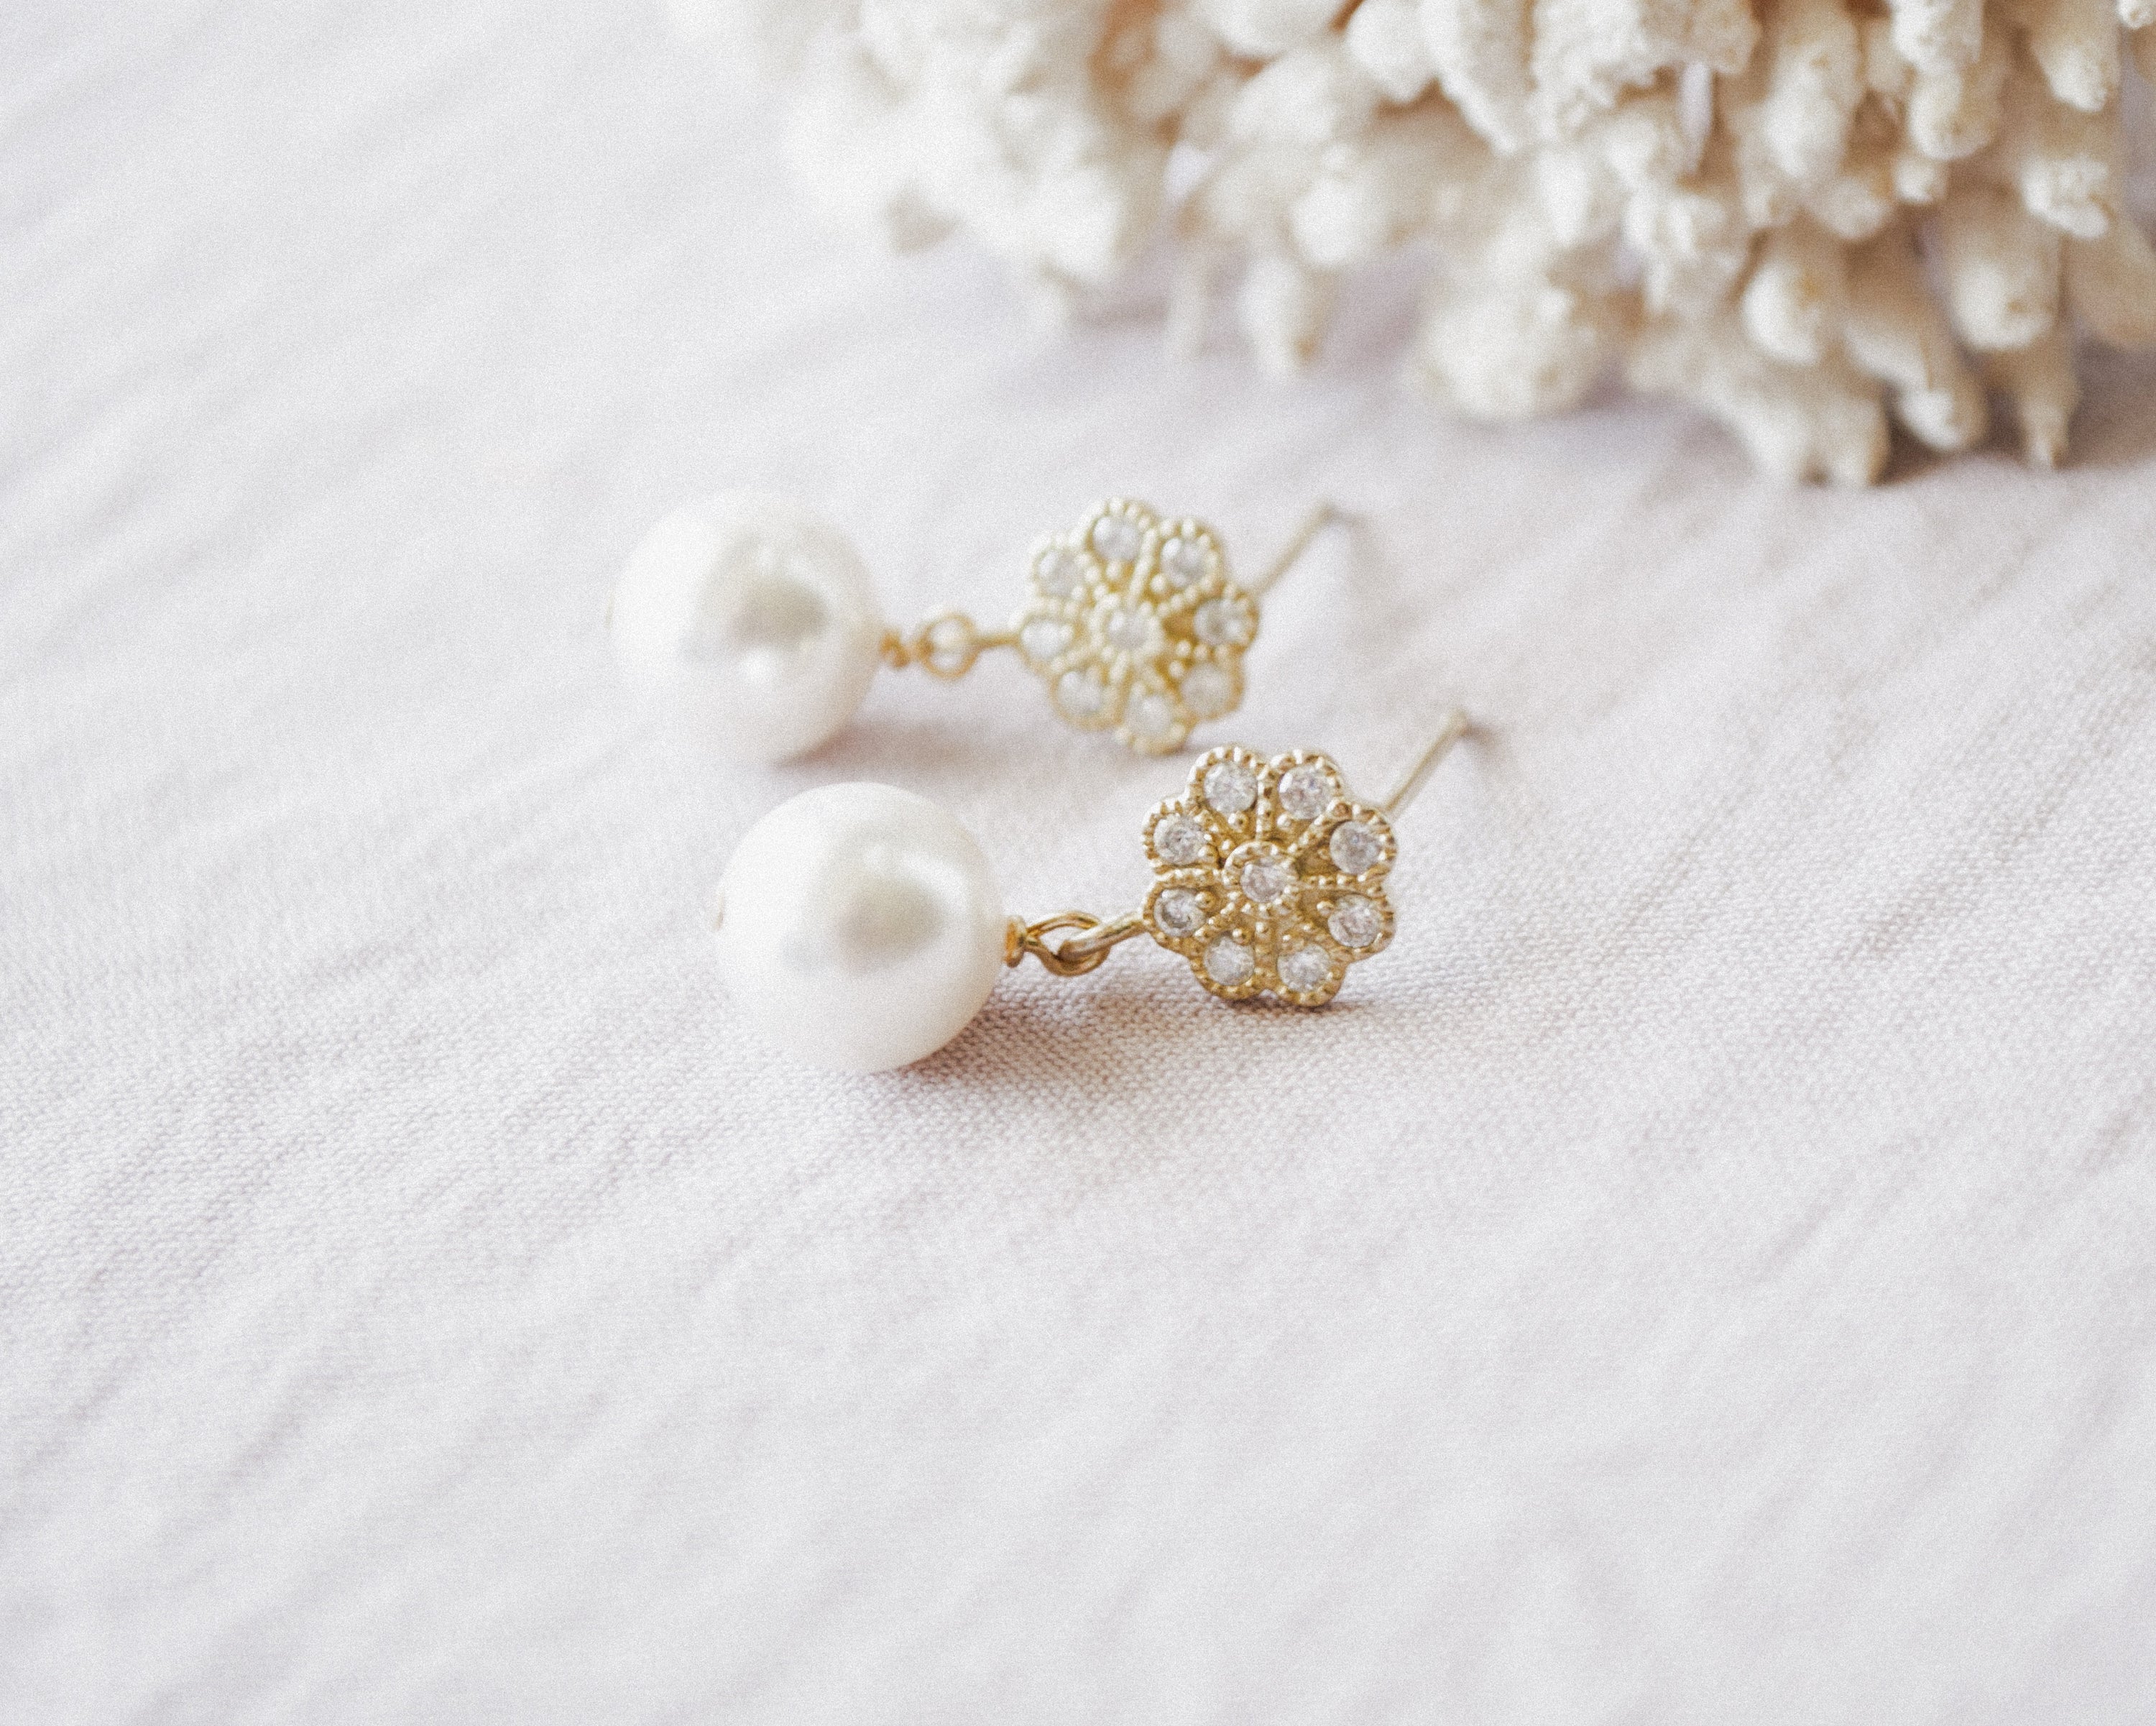 SALE Bridal Jewellery | Affordable Pearl + Crystal Bridal Accessories ...